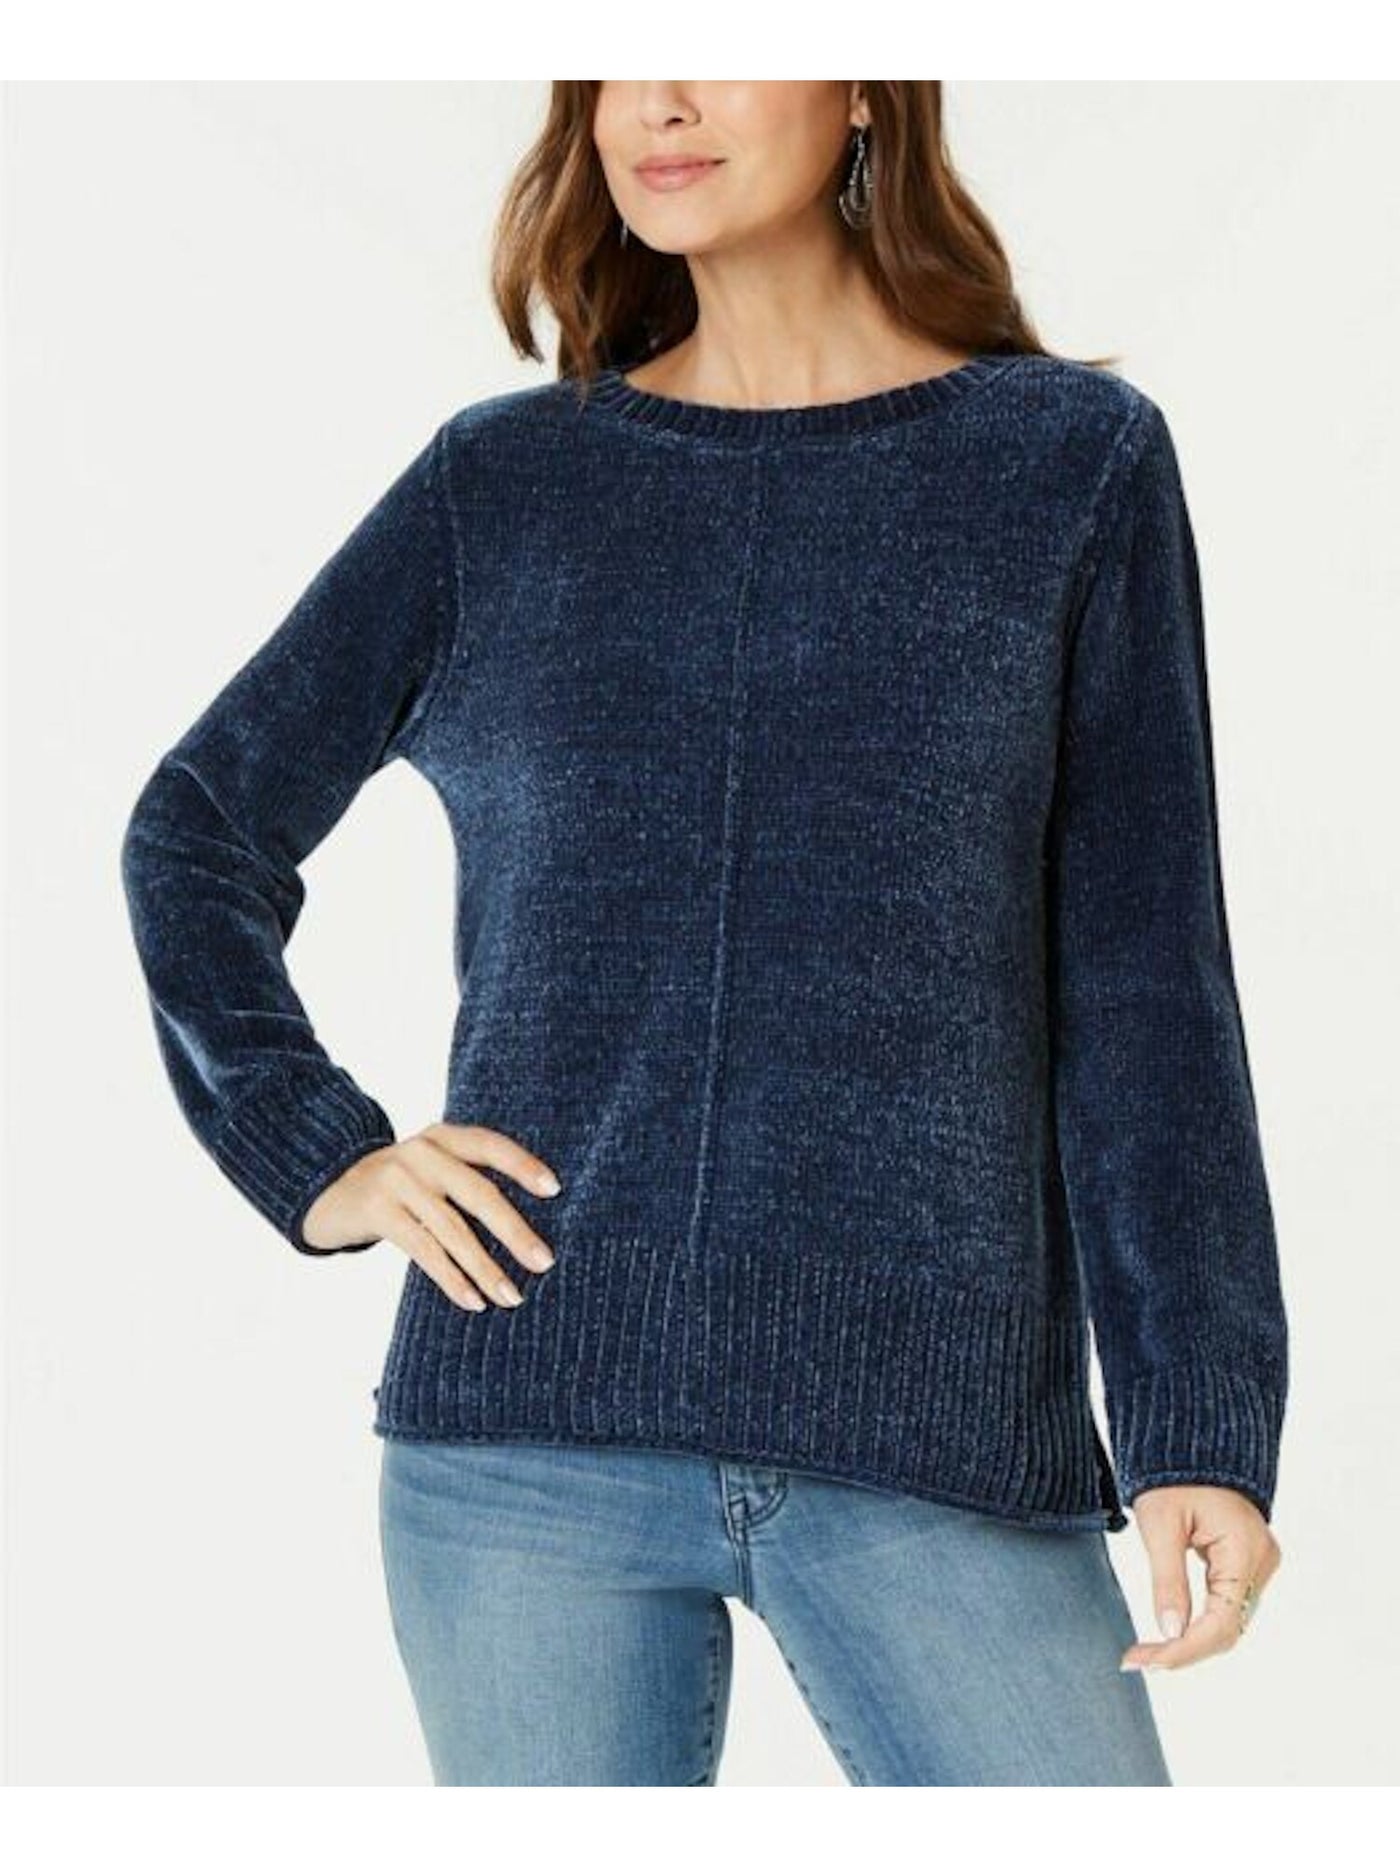 STYLE & COMPANY Womens Navy Textured Heather Long Sleeve Crew Neck Blouse XS